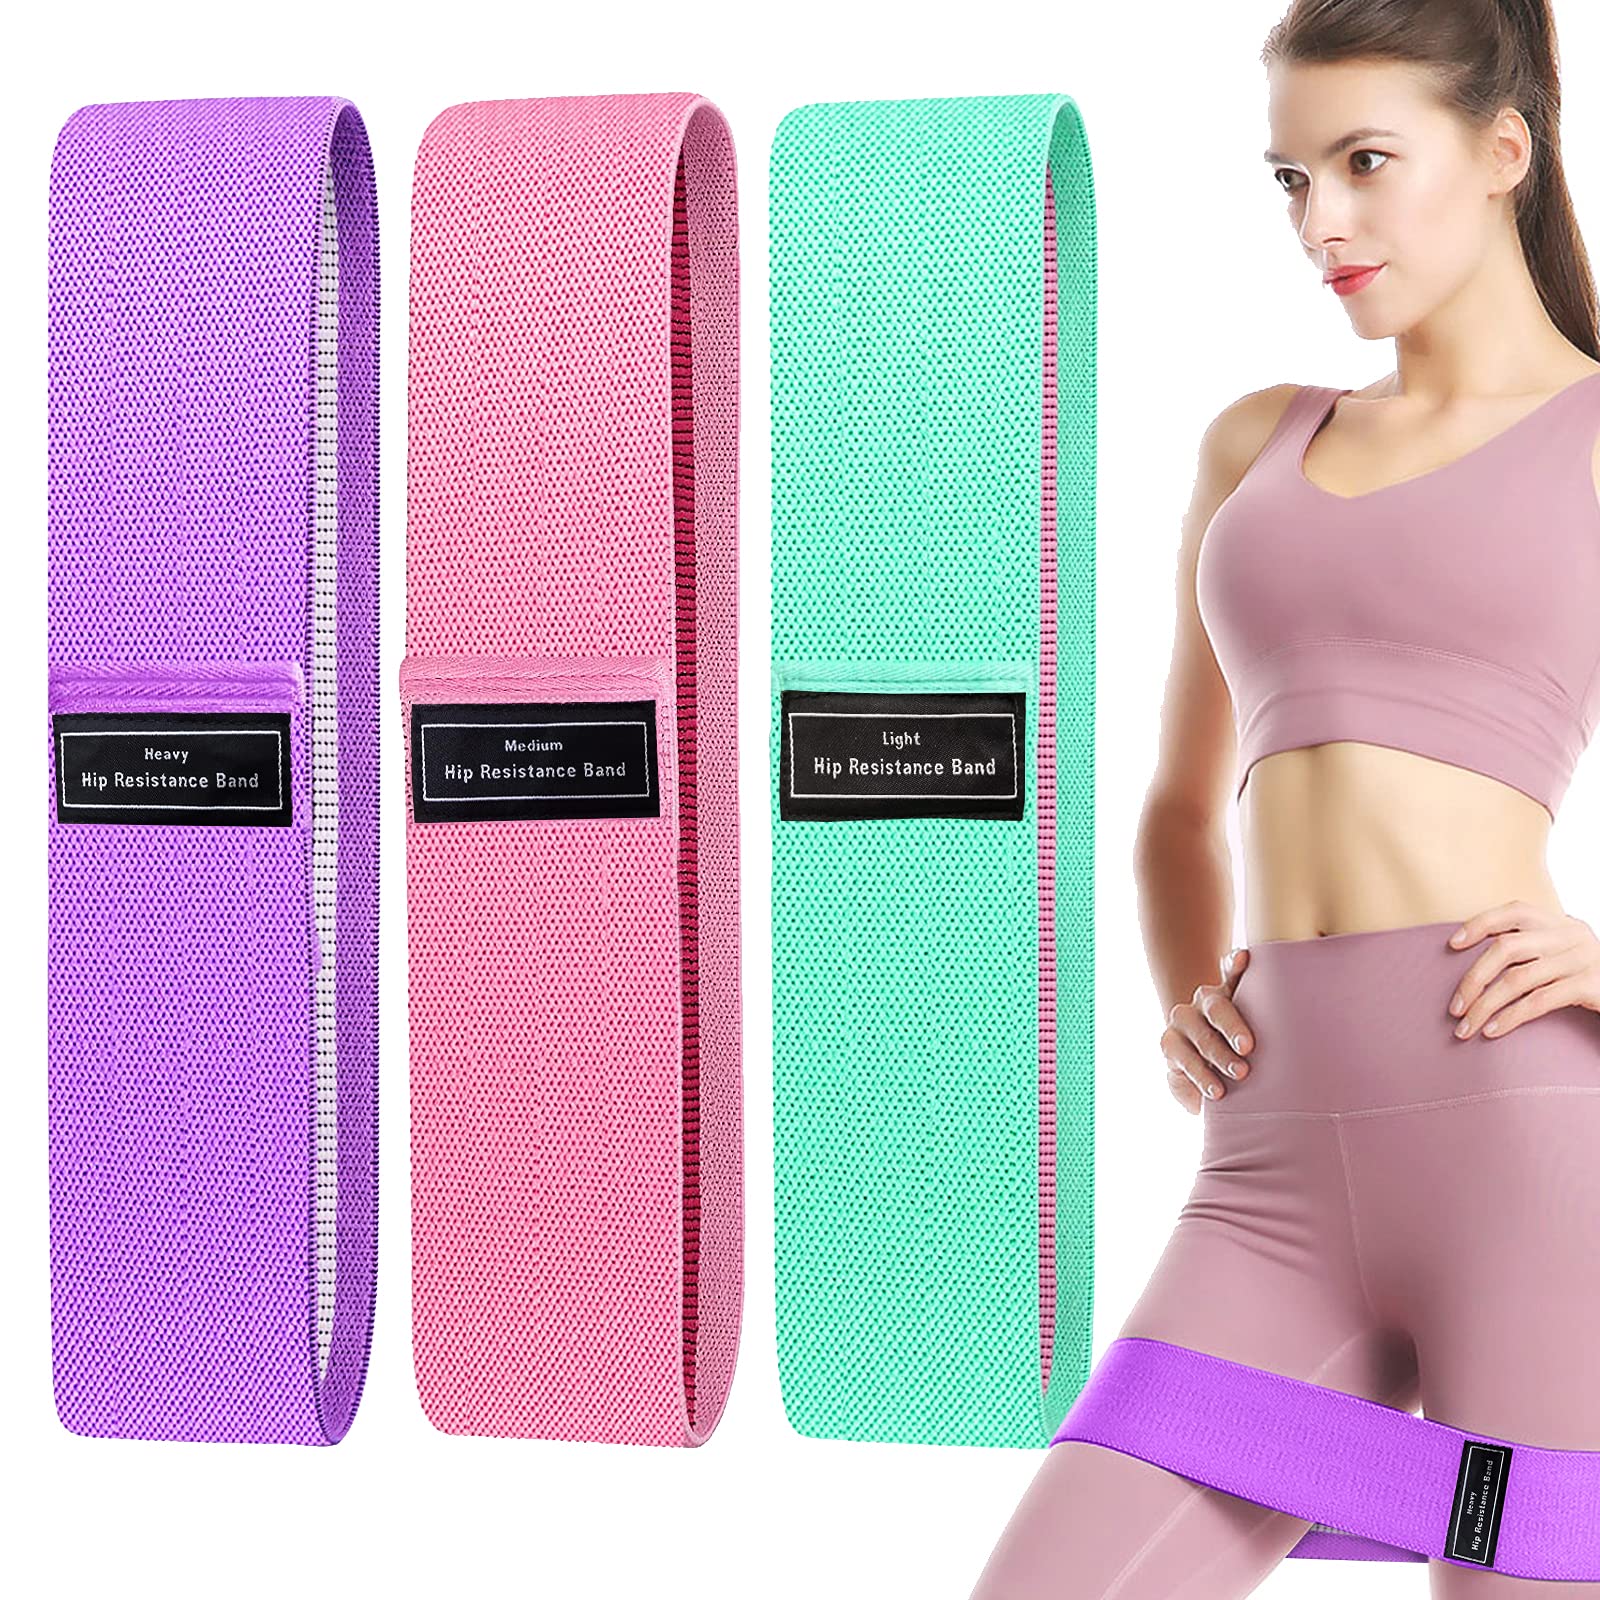 FXH Resistance Bands for Legs and Butt, Fabric Exercise Loop Bands